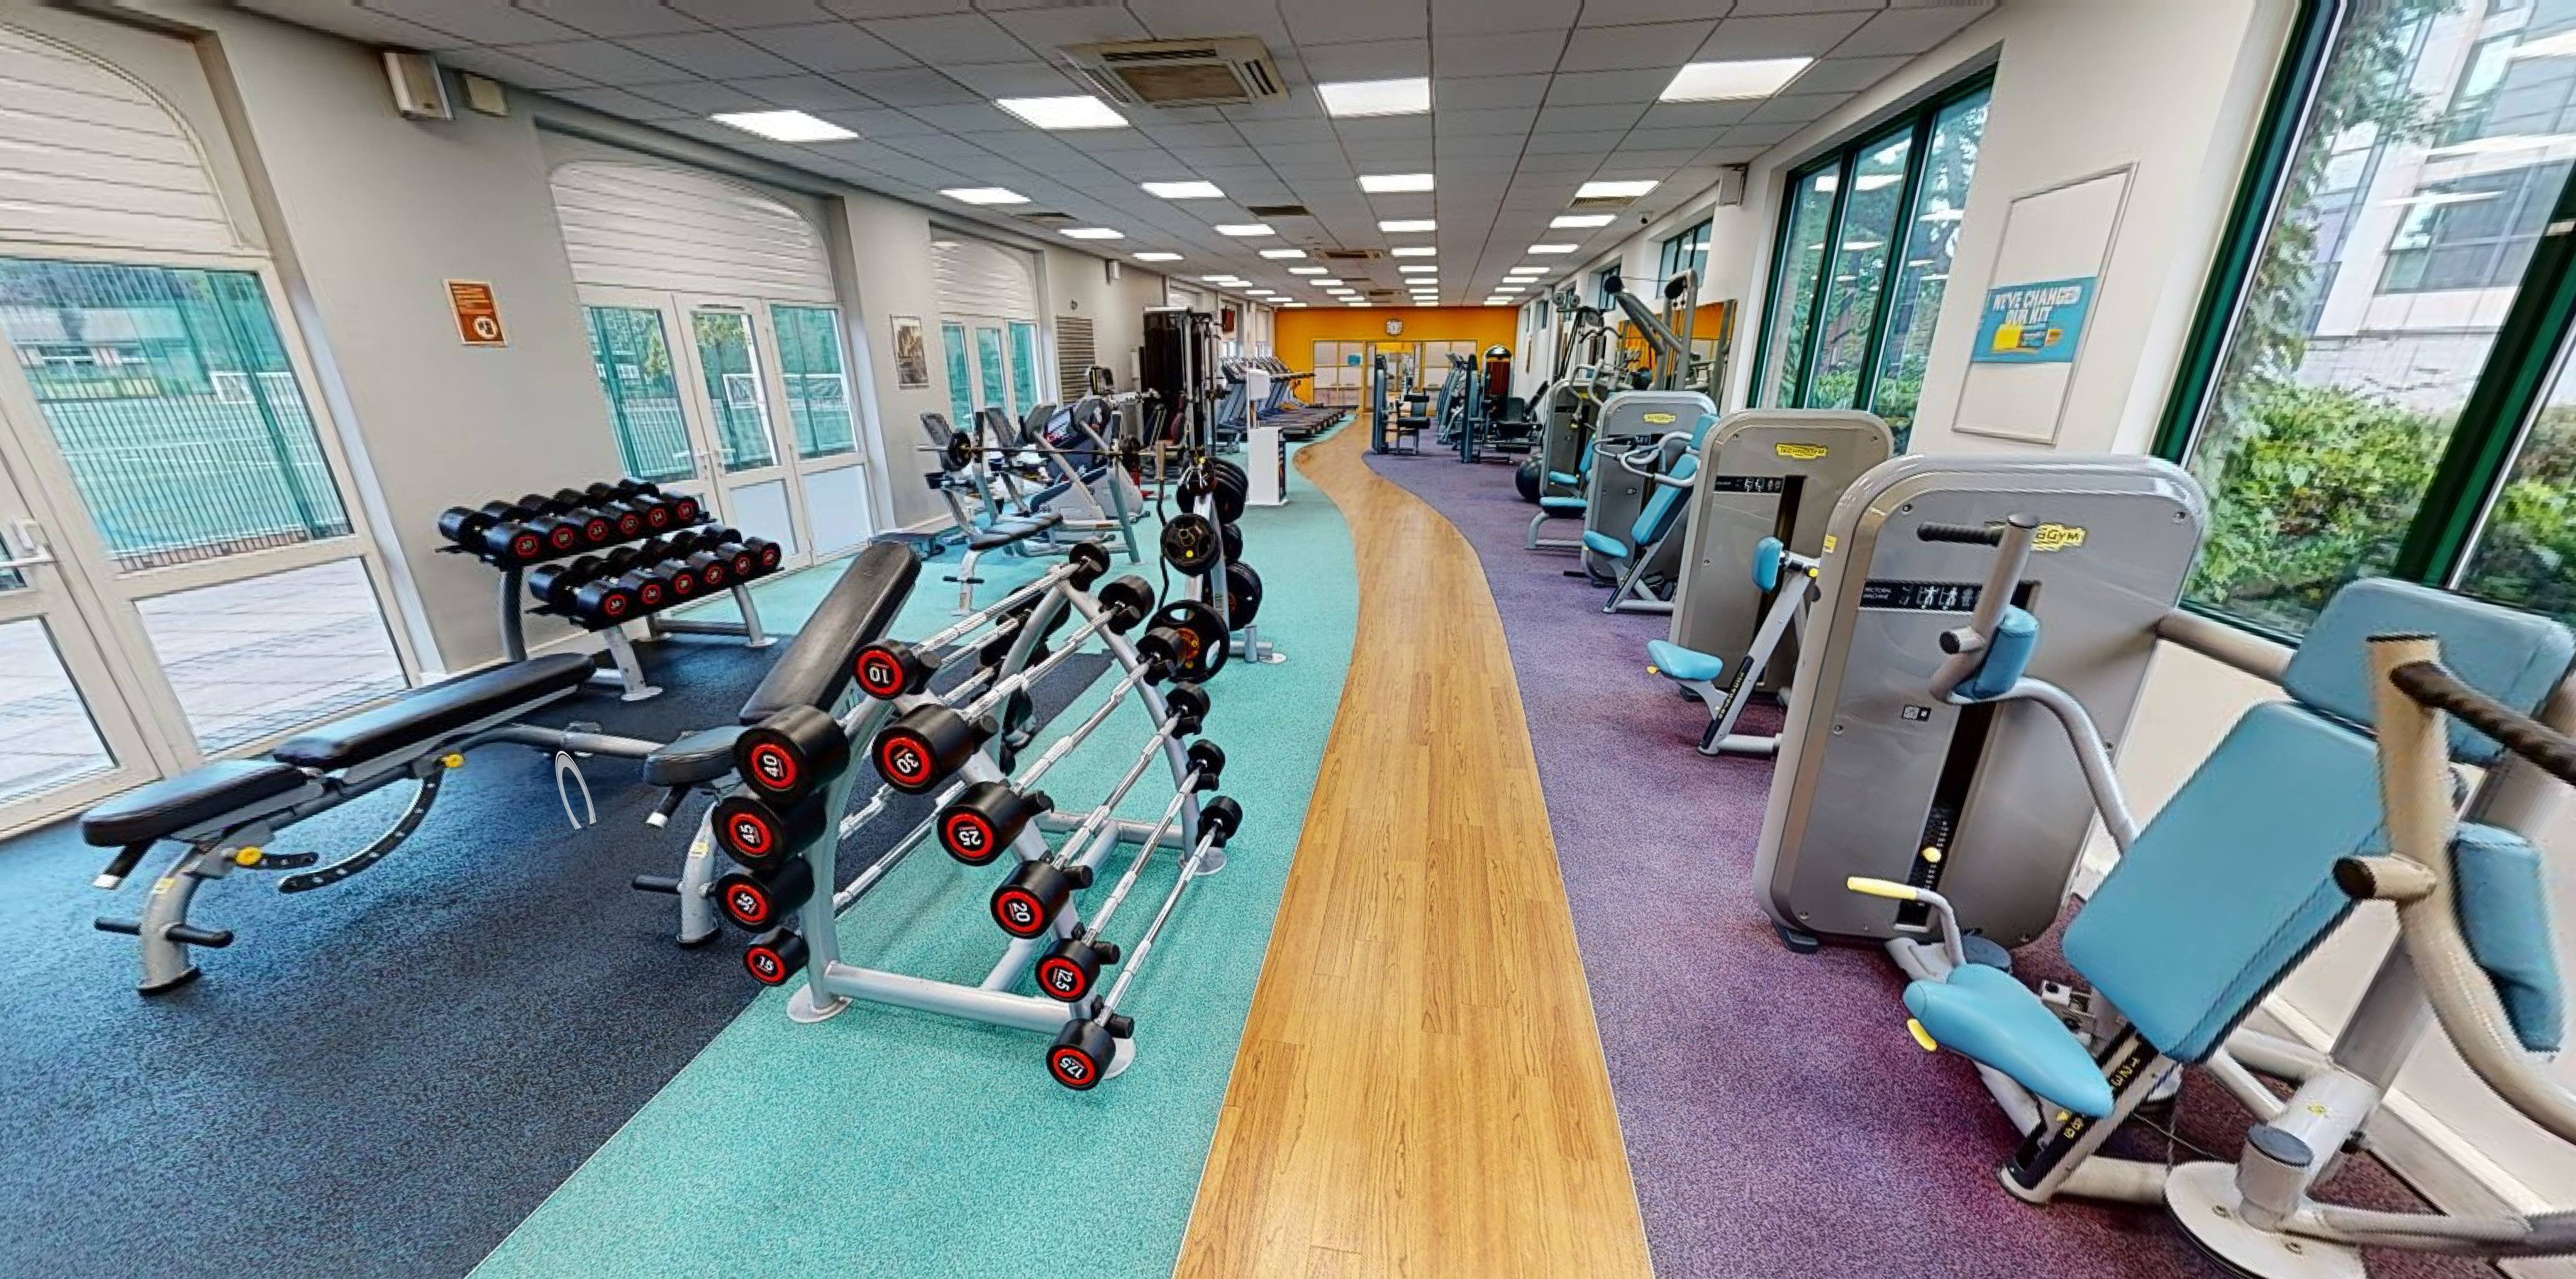 Gym at Wandle Recreation Centre Wandle Recreation Centre Wandsworth 020 8871 1149